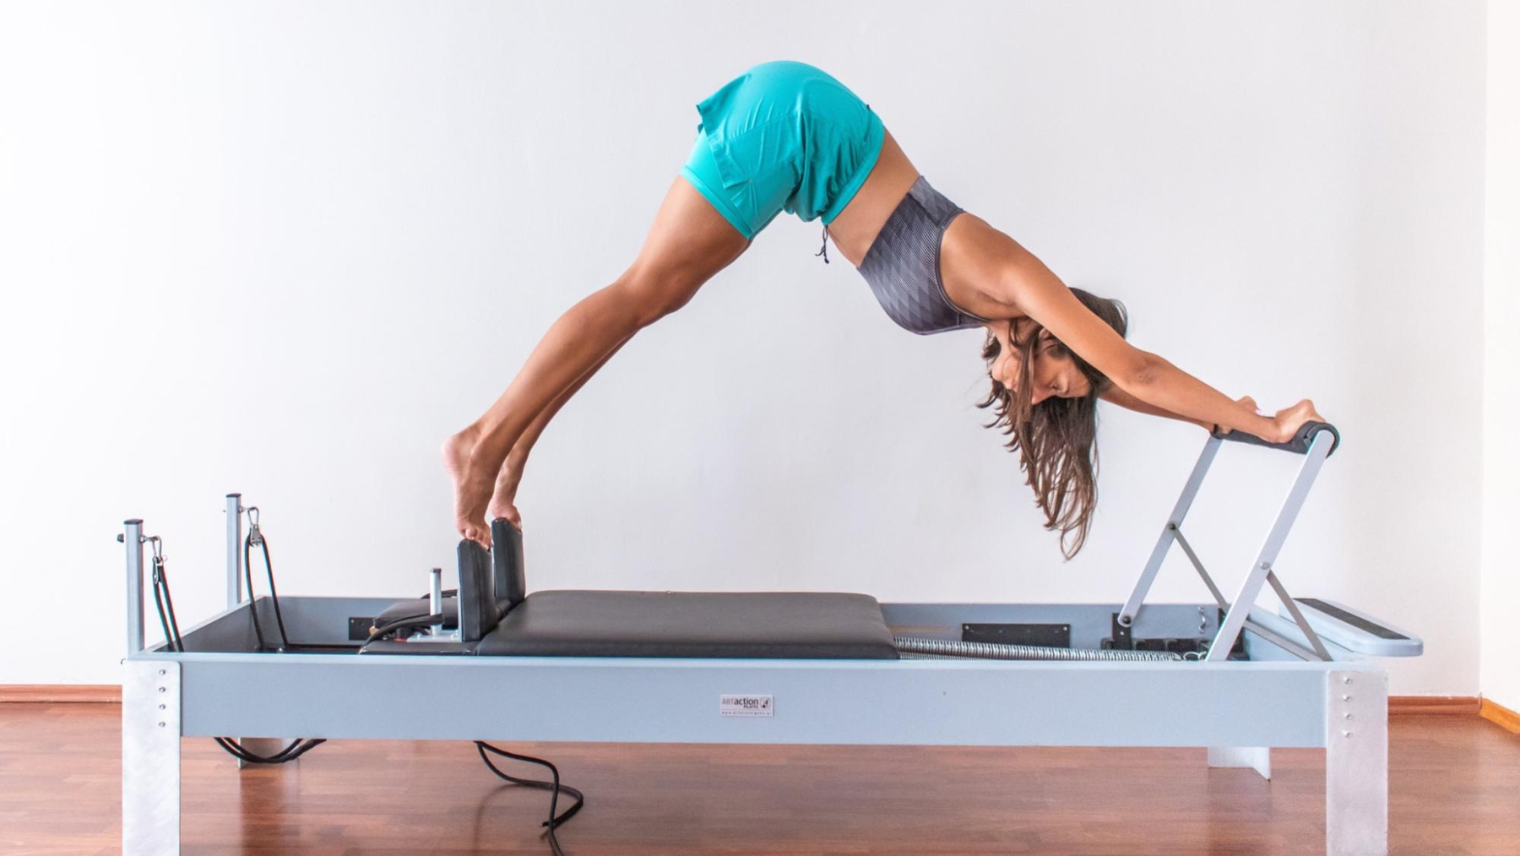 A woman on a reformer pilates machine in downward facing dog